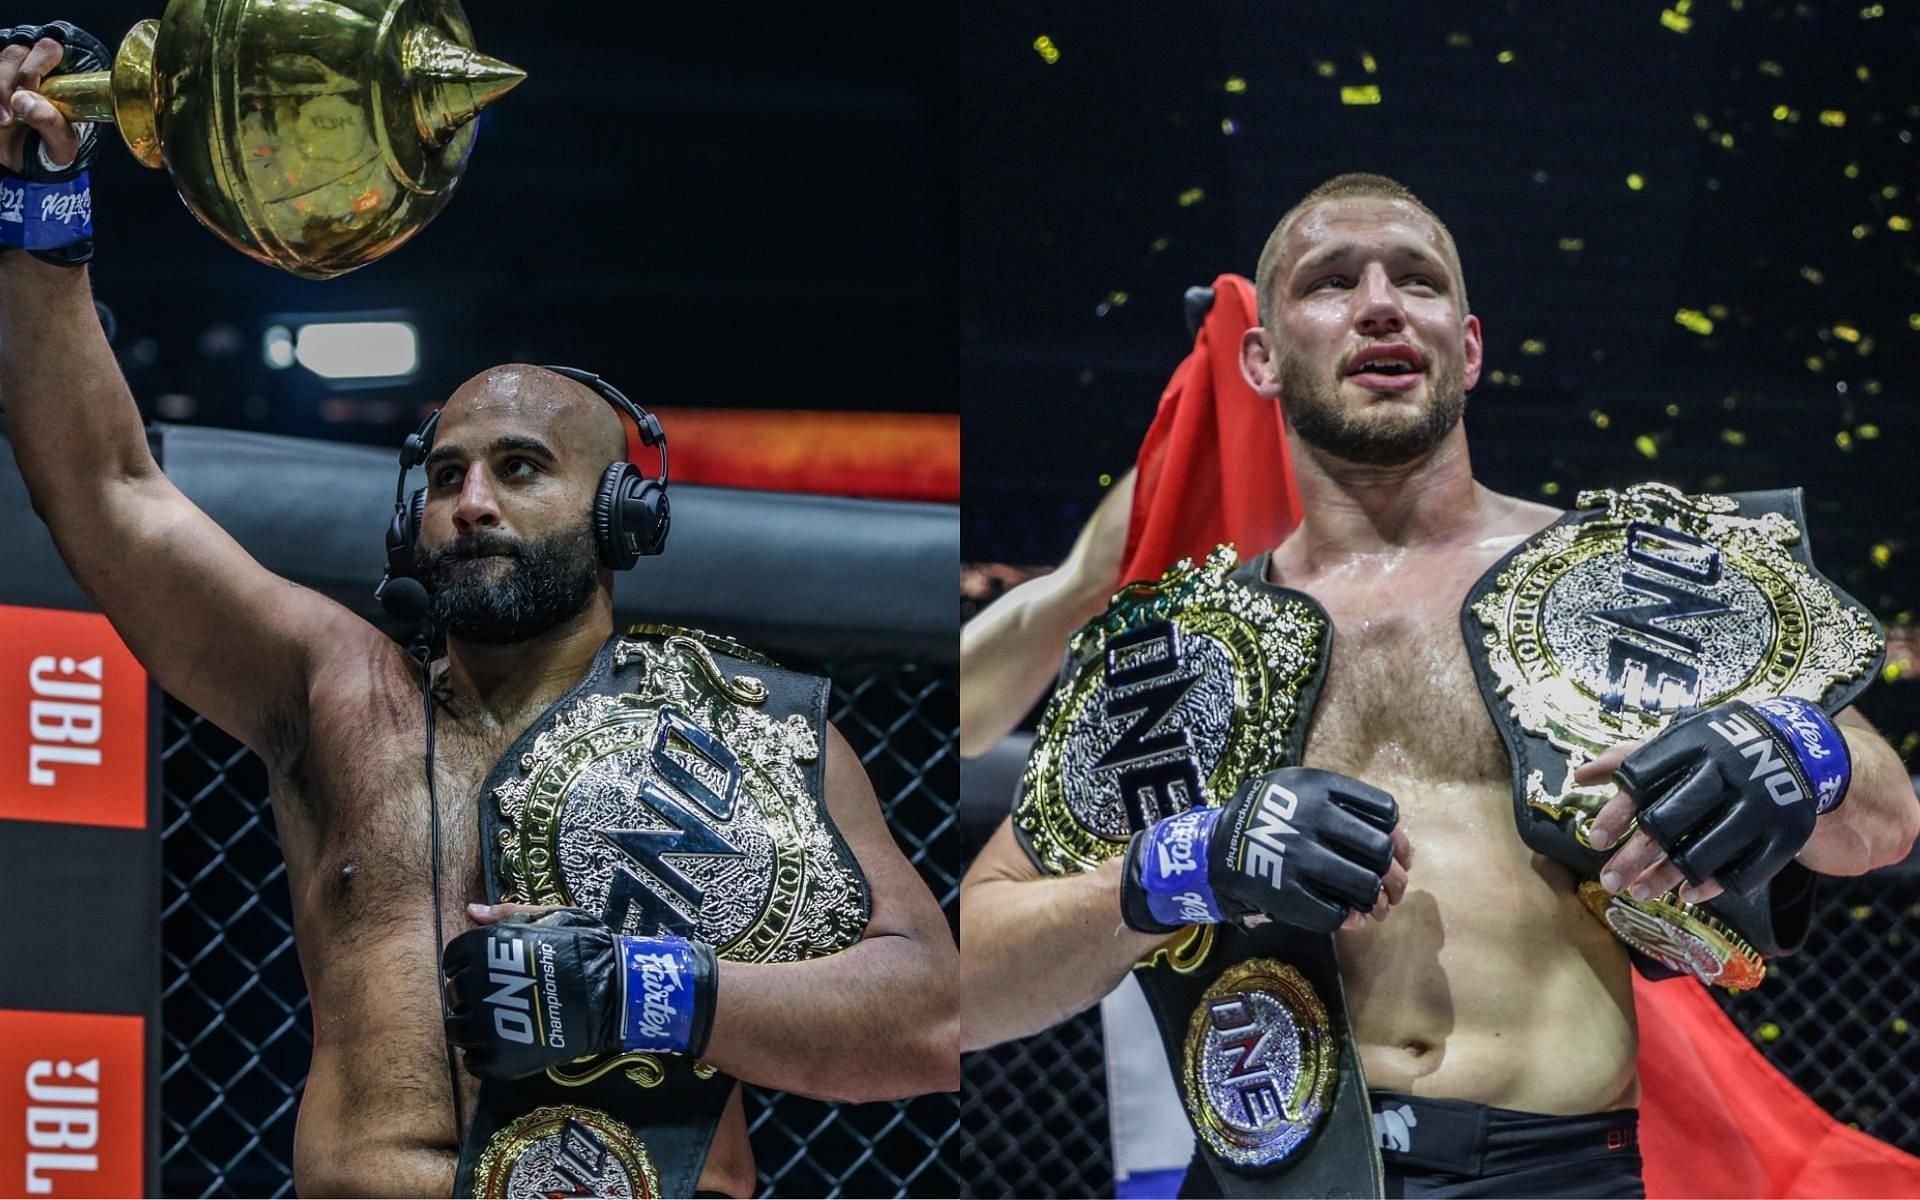 A champion vs. champion but between ONE heavyweight king Arjan Bhullar (left) and ONE double champ Reinier de Ridder (right) might happen in the future. (Images courtesy of ONE Championship)